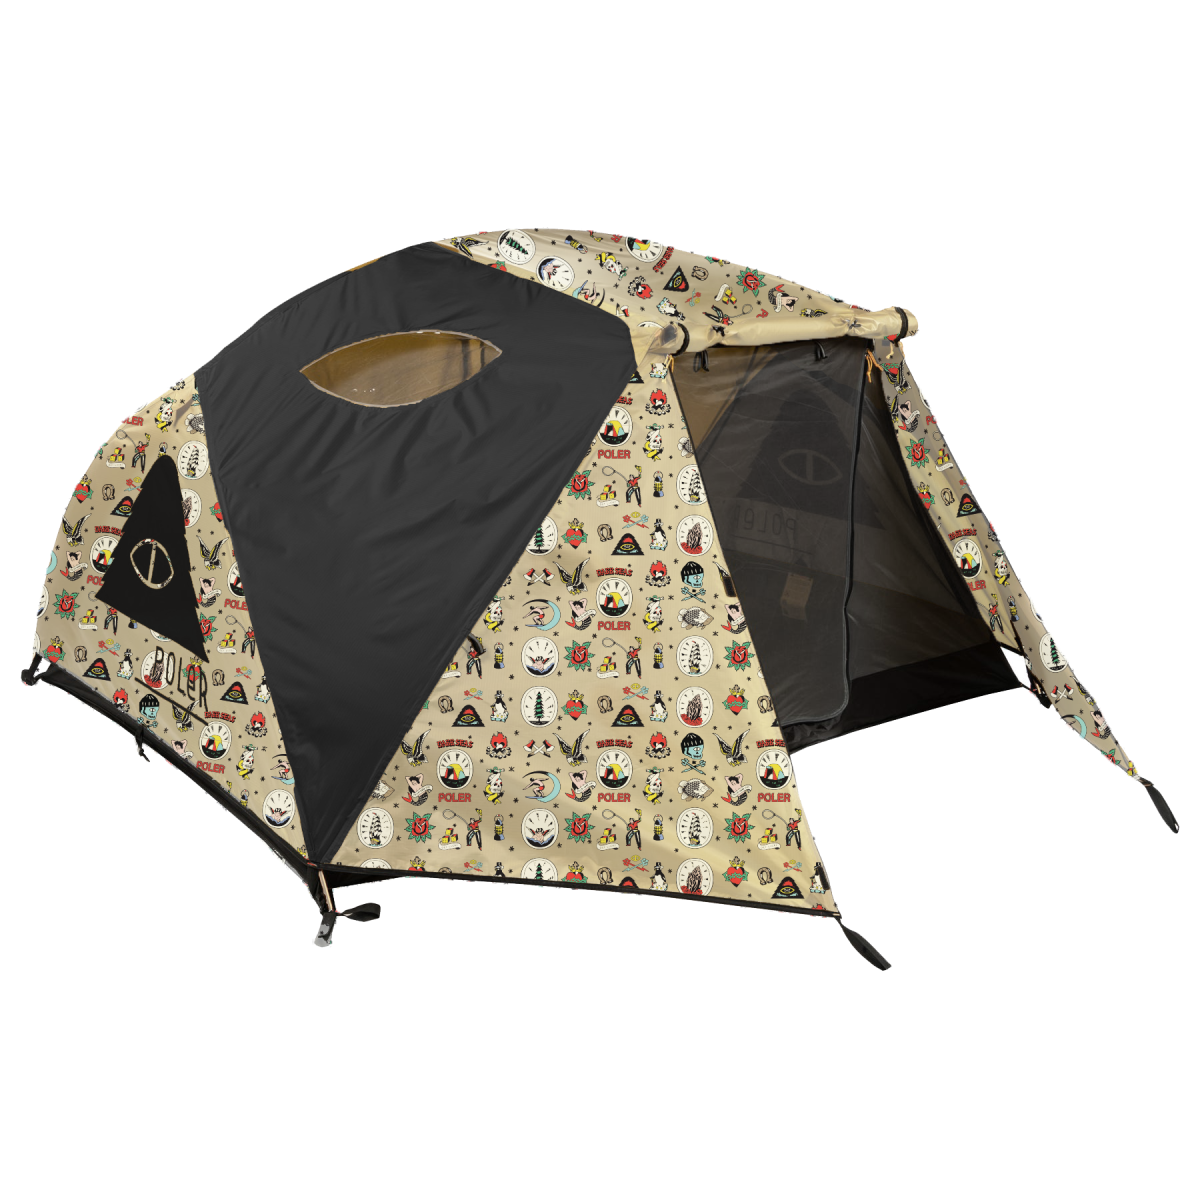 TWO PERSON TENT – polerjapan